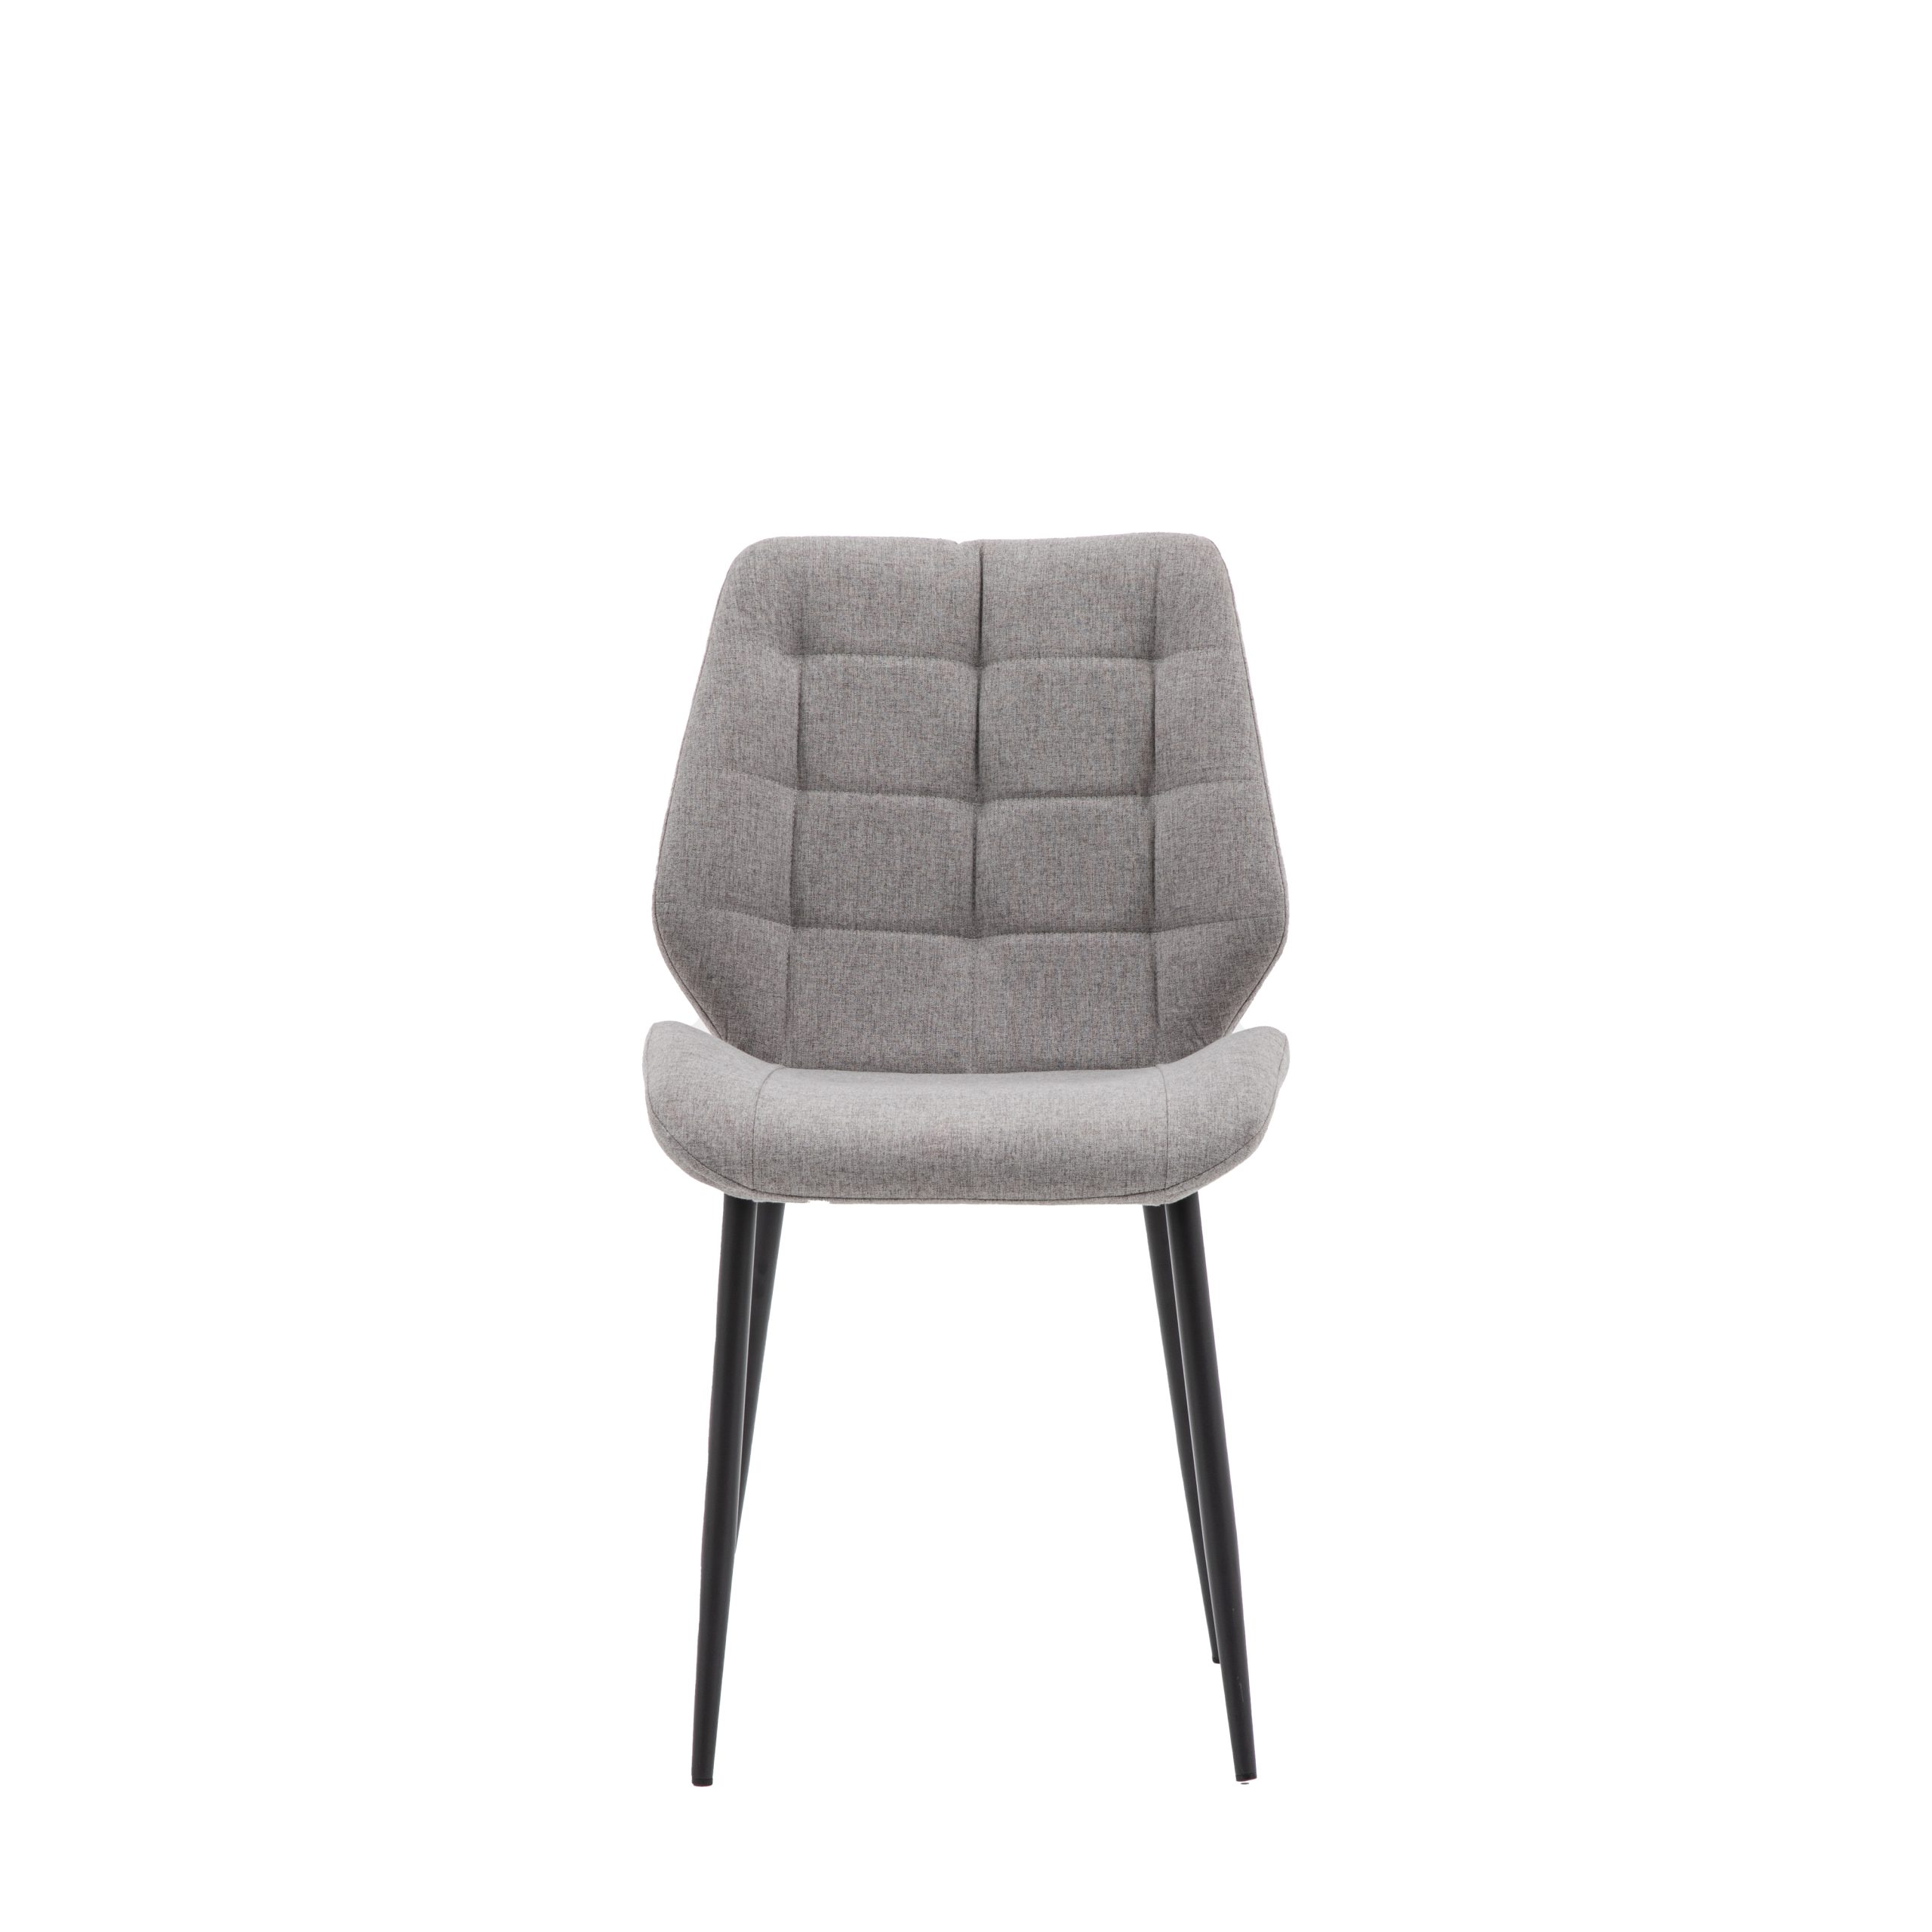 Gallery Direct Manford Dining Chair Light Grey (Set of 2)